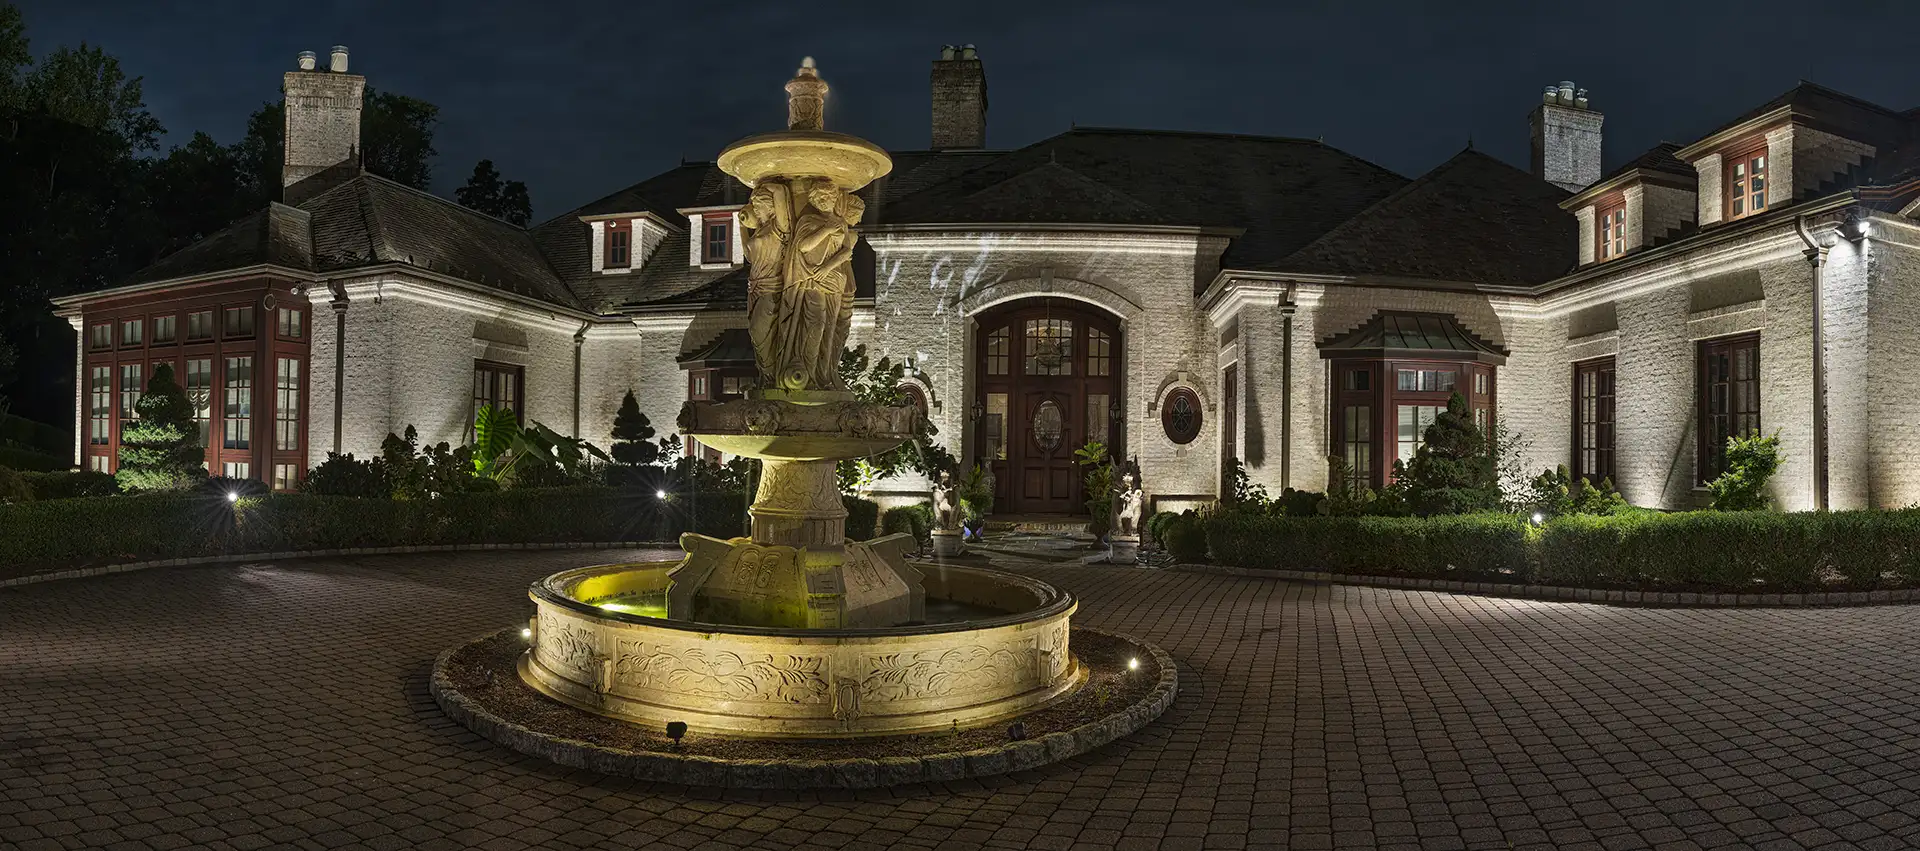 He residence image 5 front entry statuary fountain Lighthouse Outdoor Lighting and Audio Northern New Jersey